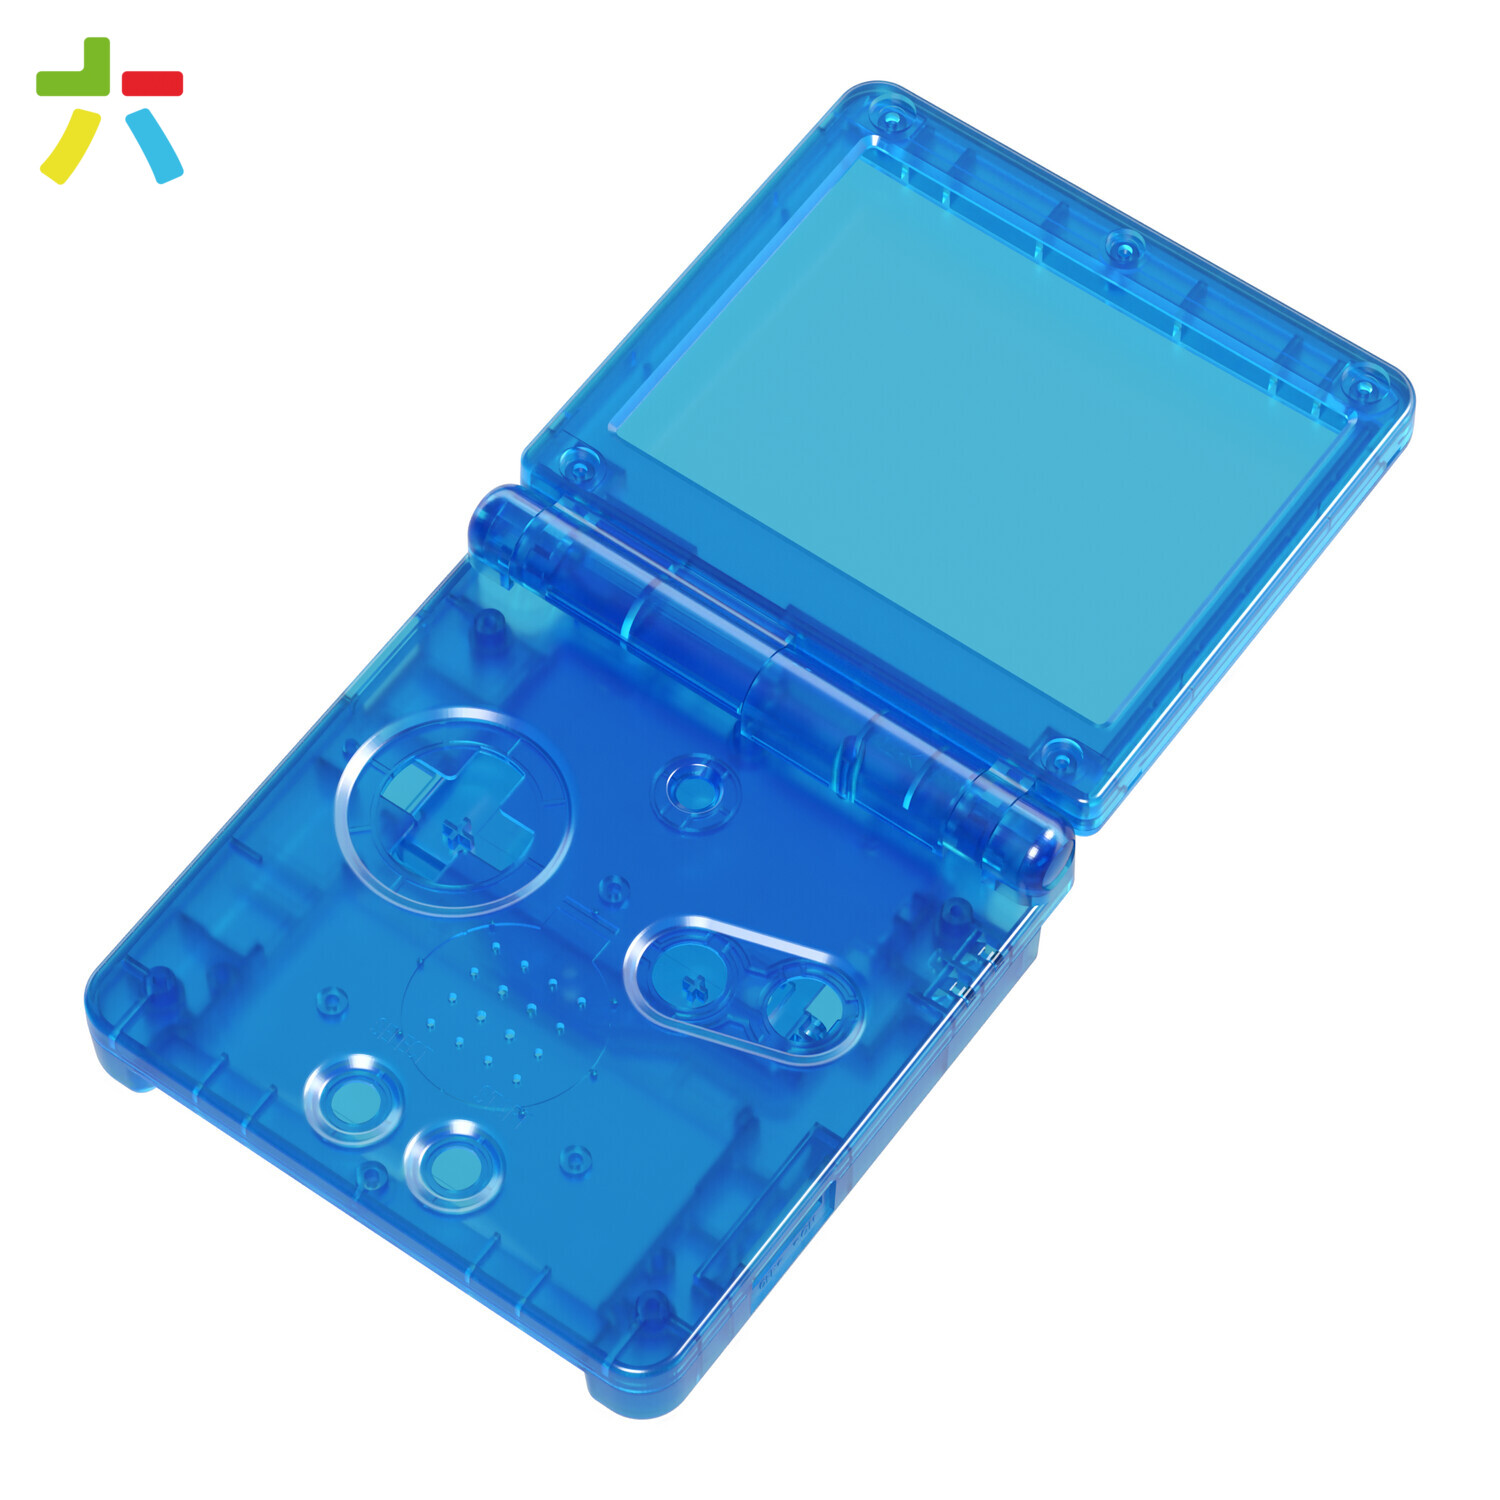 Game Boy Advance SP Shell (Clear Blue)